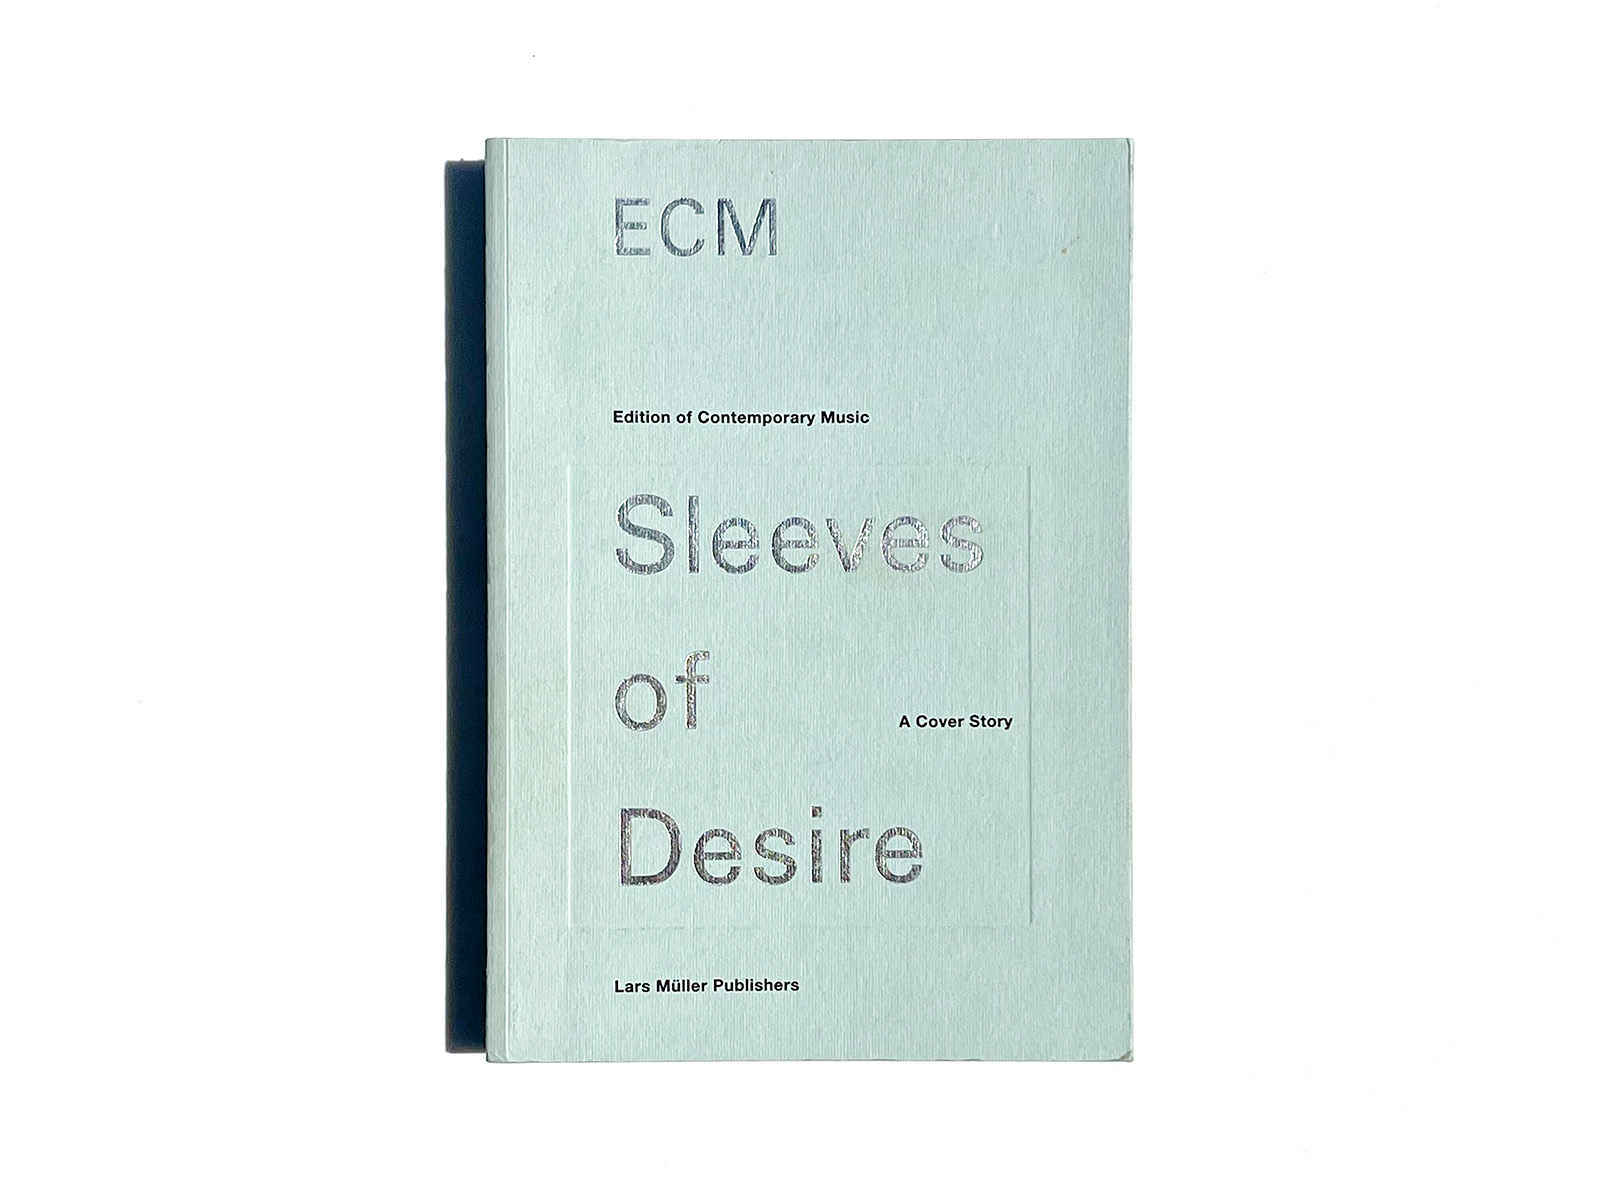 ECM Sleeves of Desire (A Cover Story)